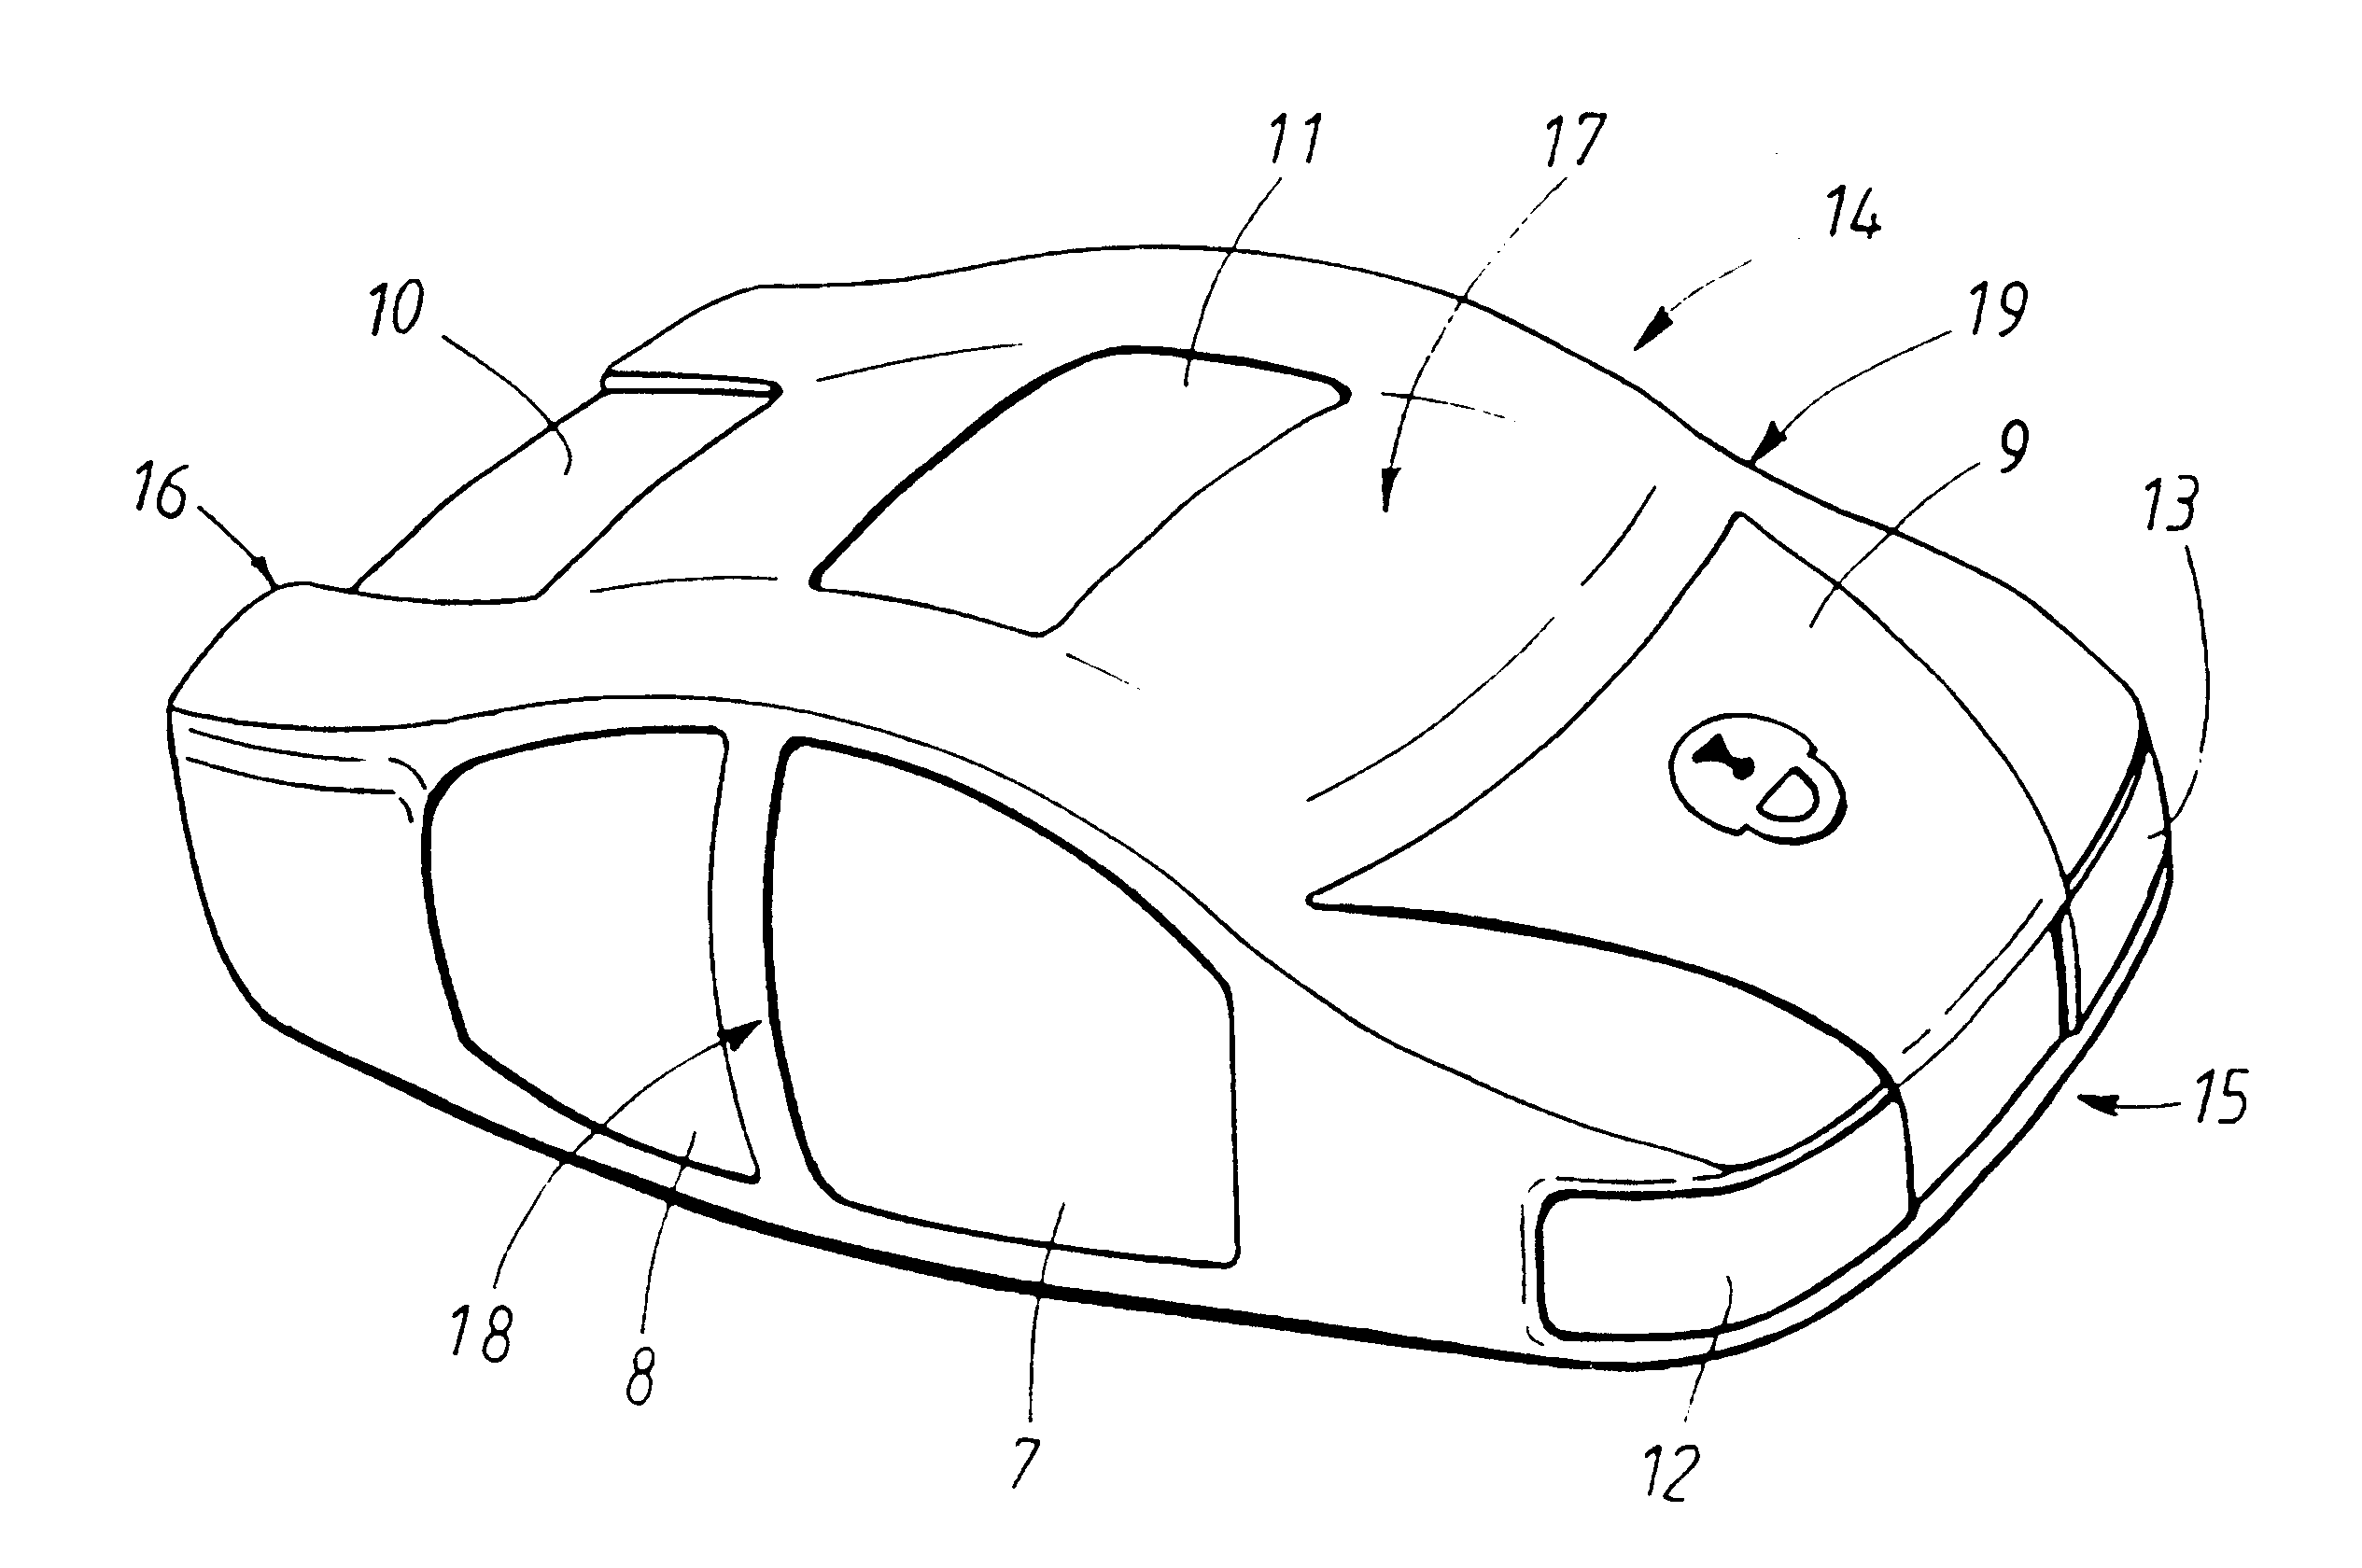 Remote control device for remote operation of a motor vehicle